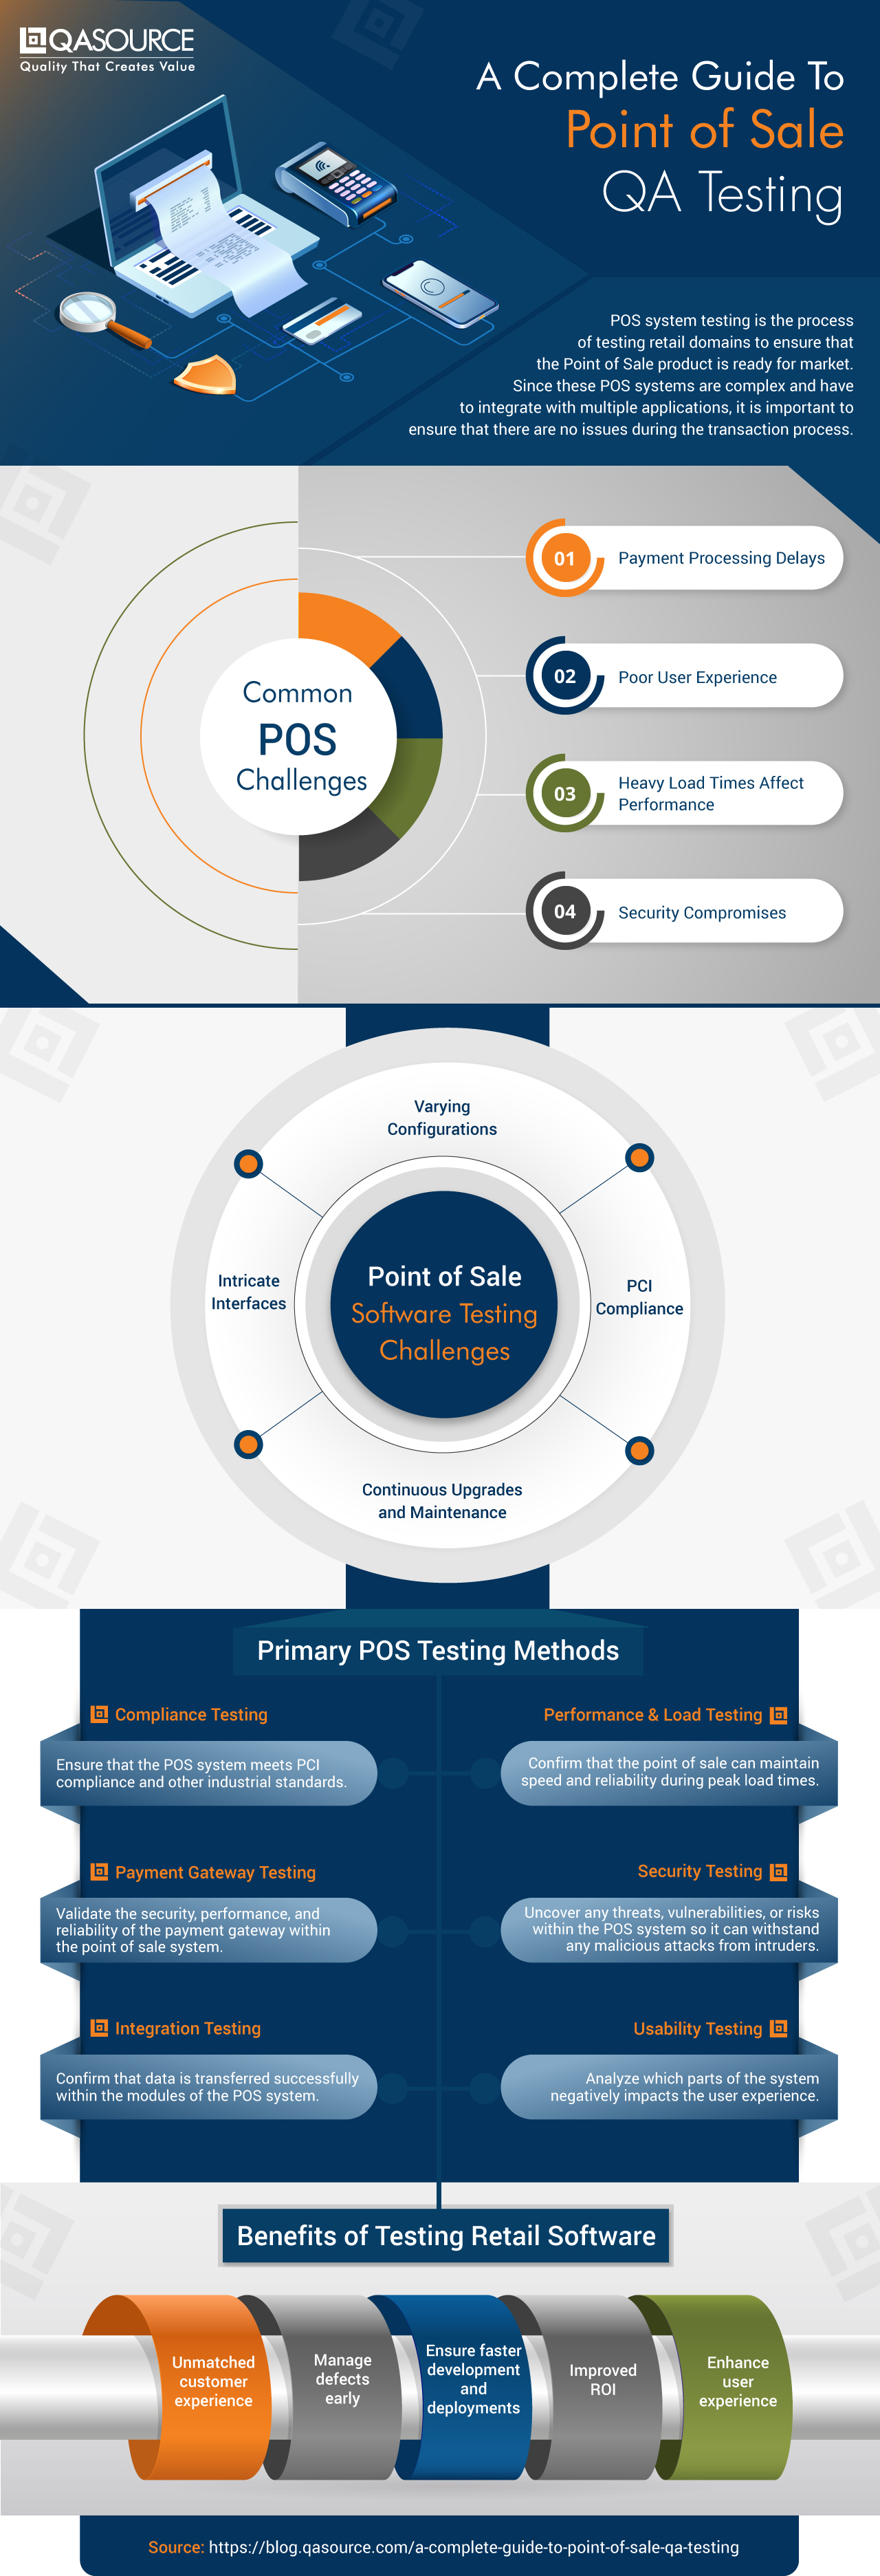 A Complete Guide To Point of Sale QA Testing